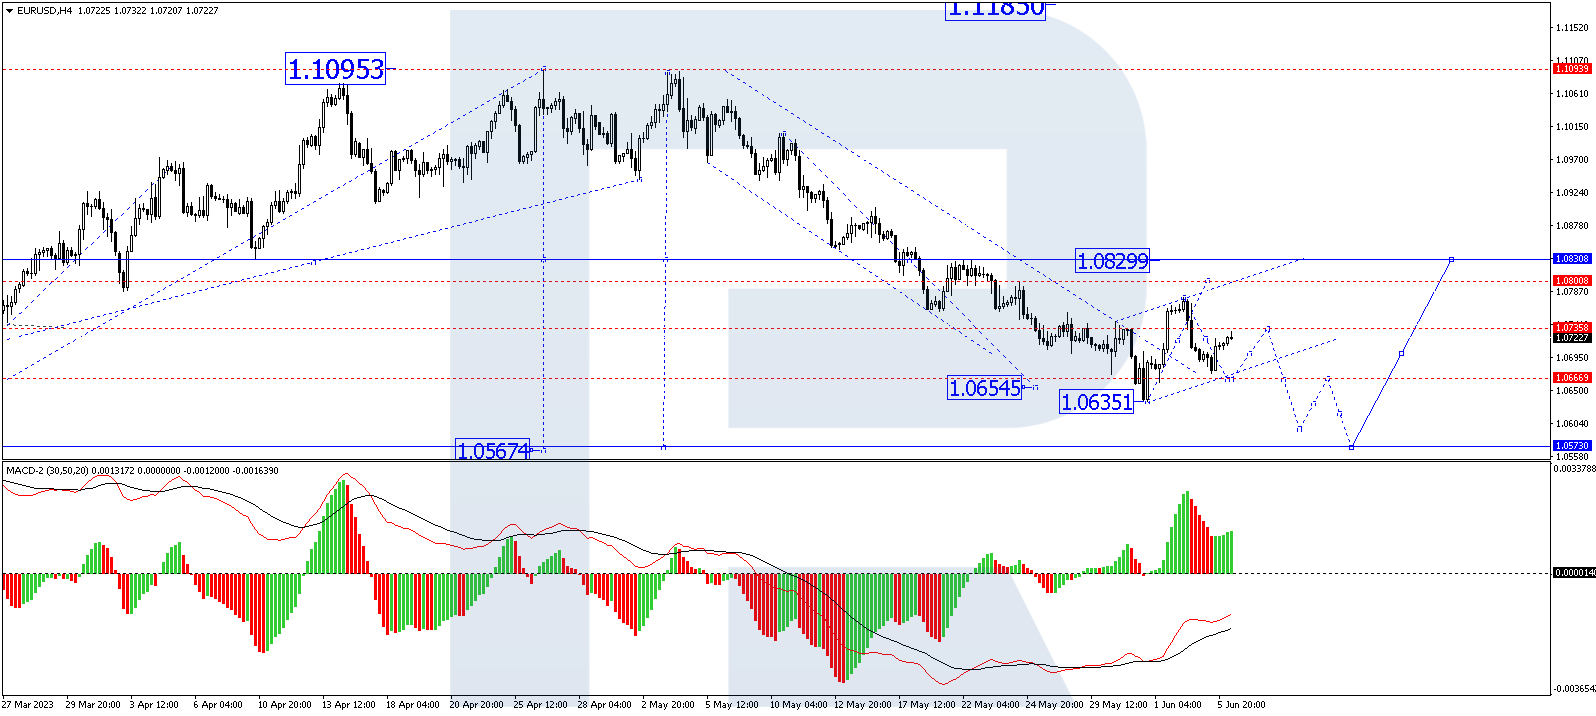 On a 4-hour chart (H4), EUR/USD corrected to 1.0762